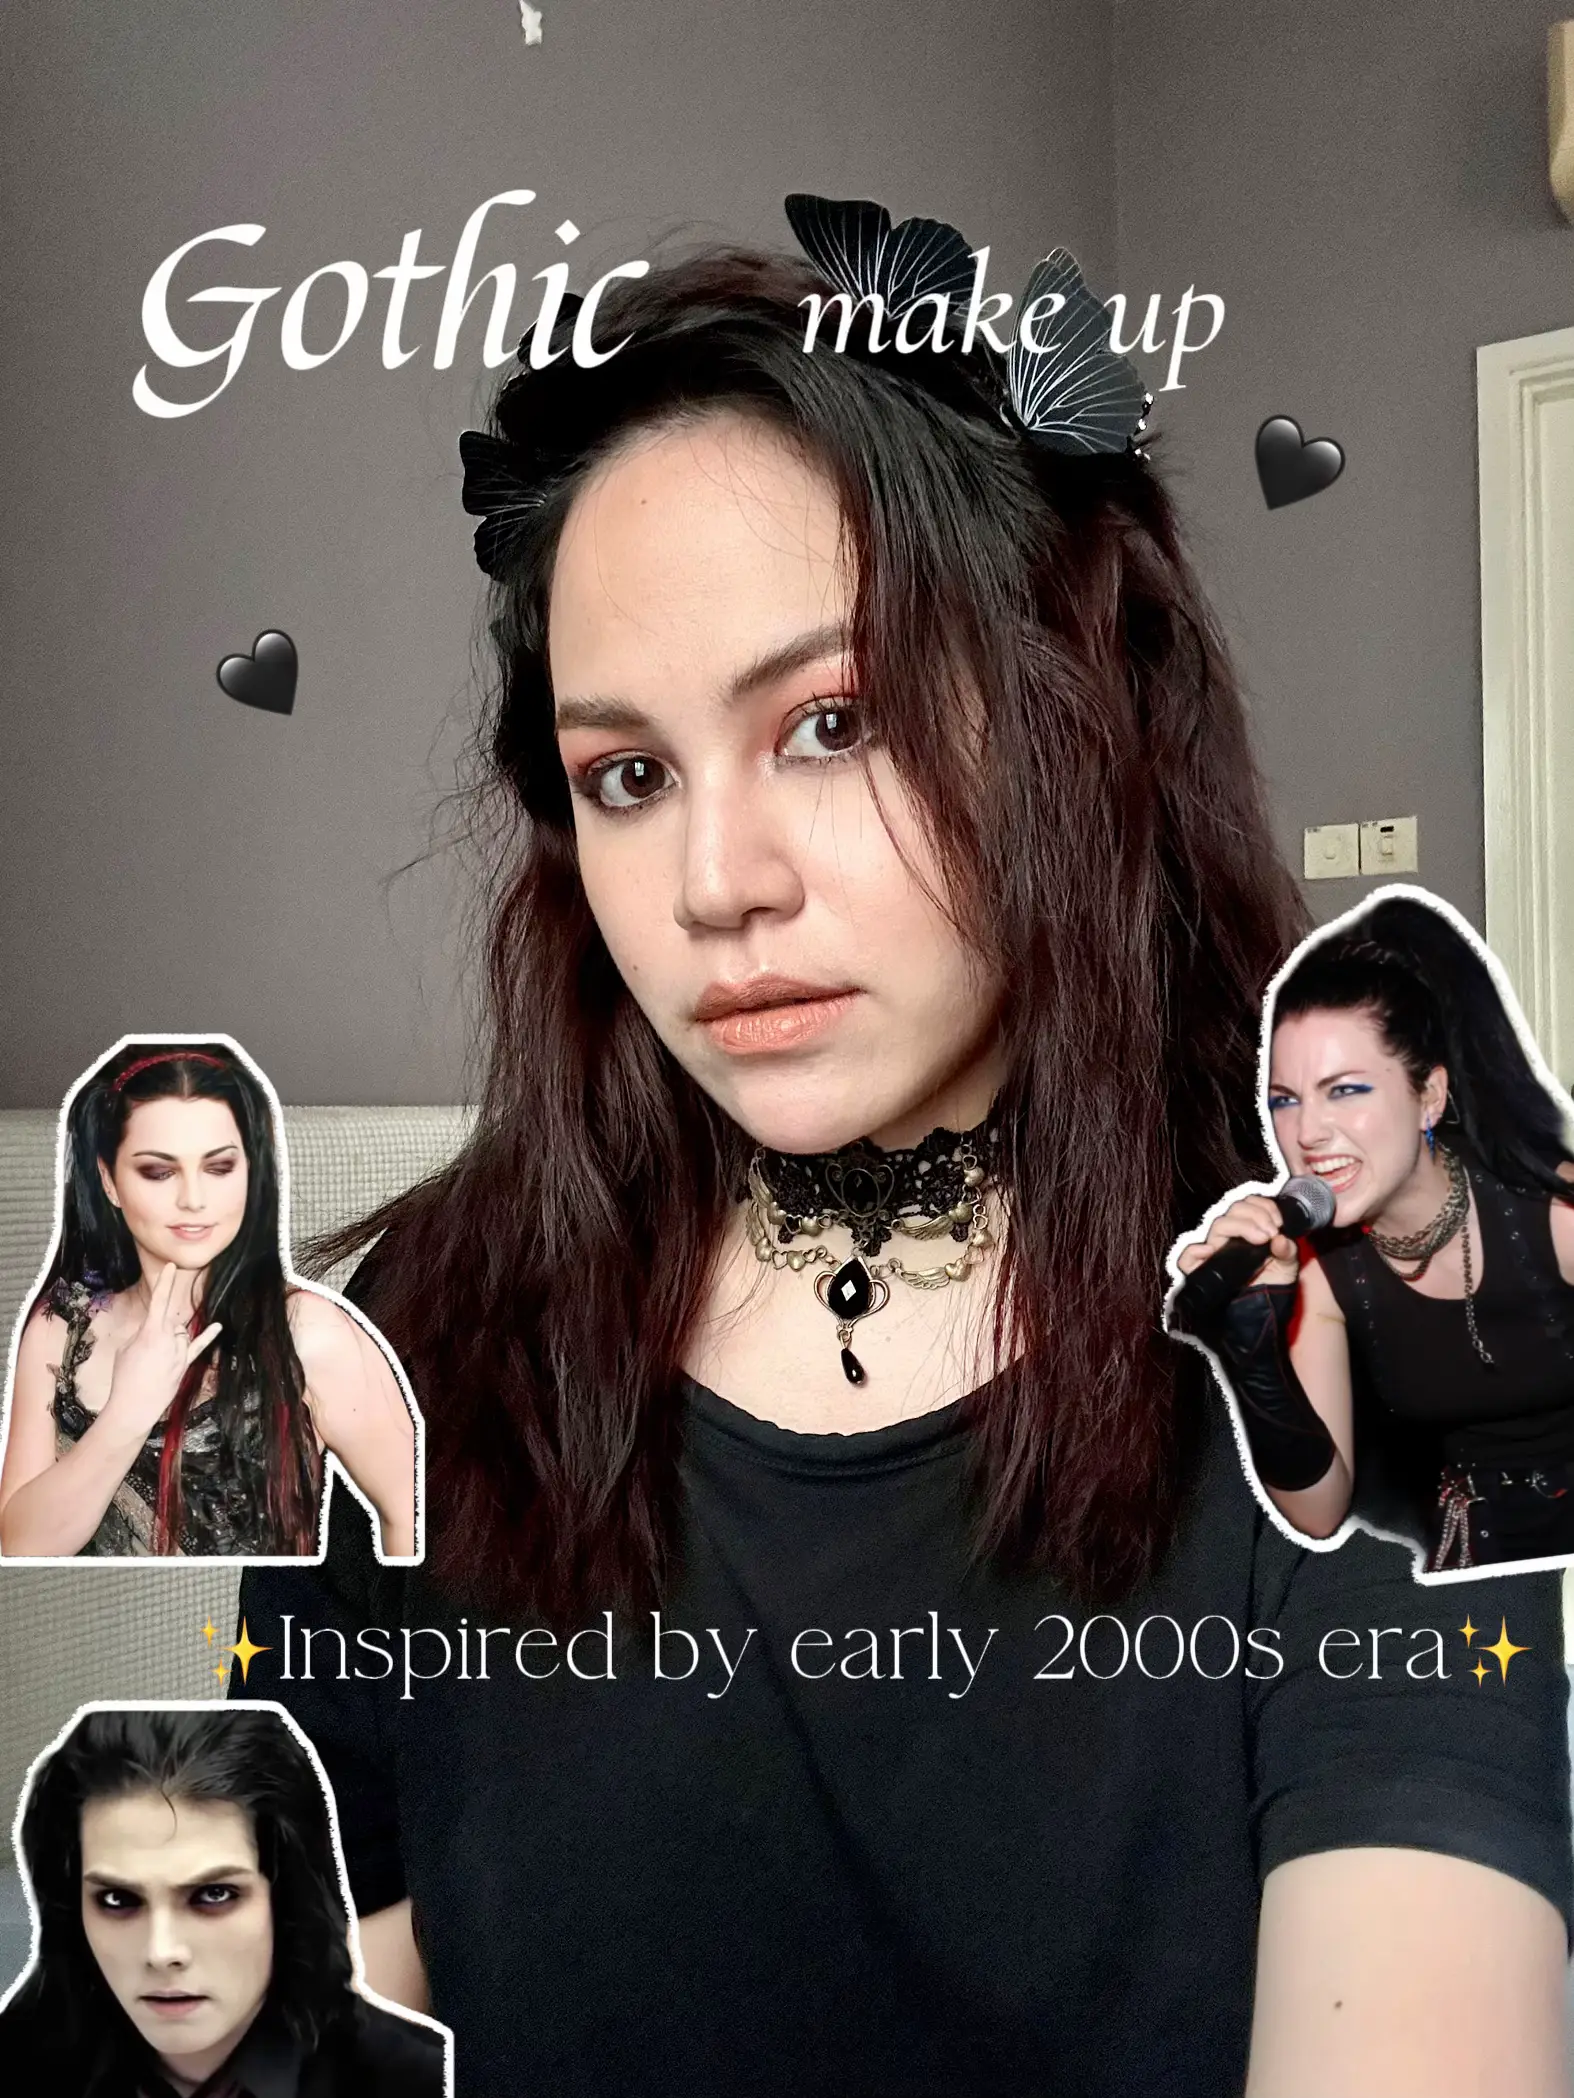 Gothic make up Inspired by Amy Lee🖤, Gallery posted by Qiyl⭐️